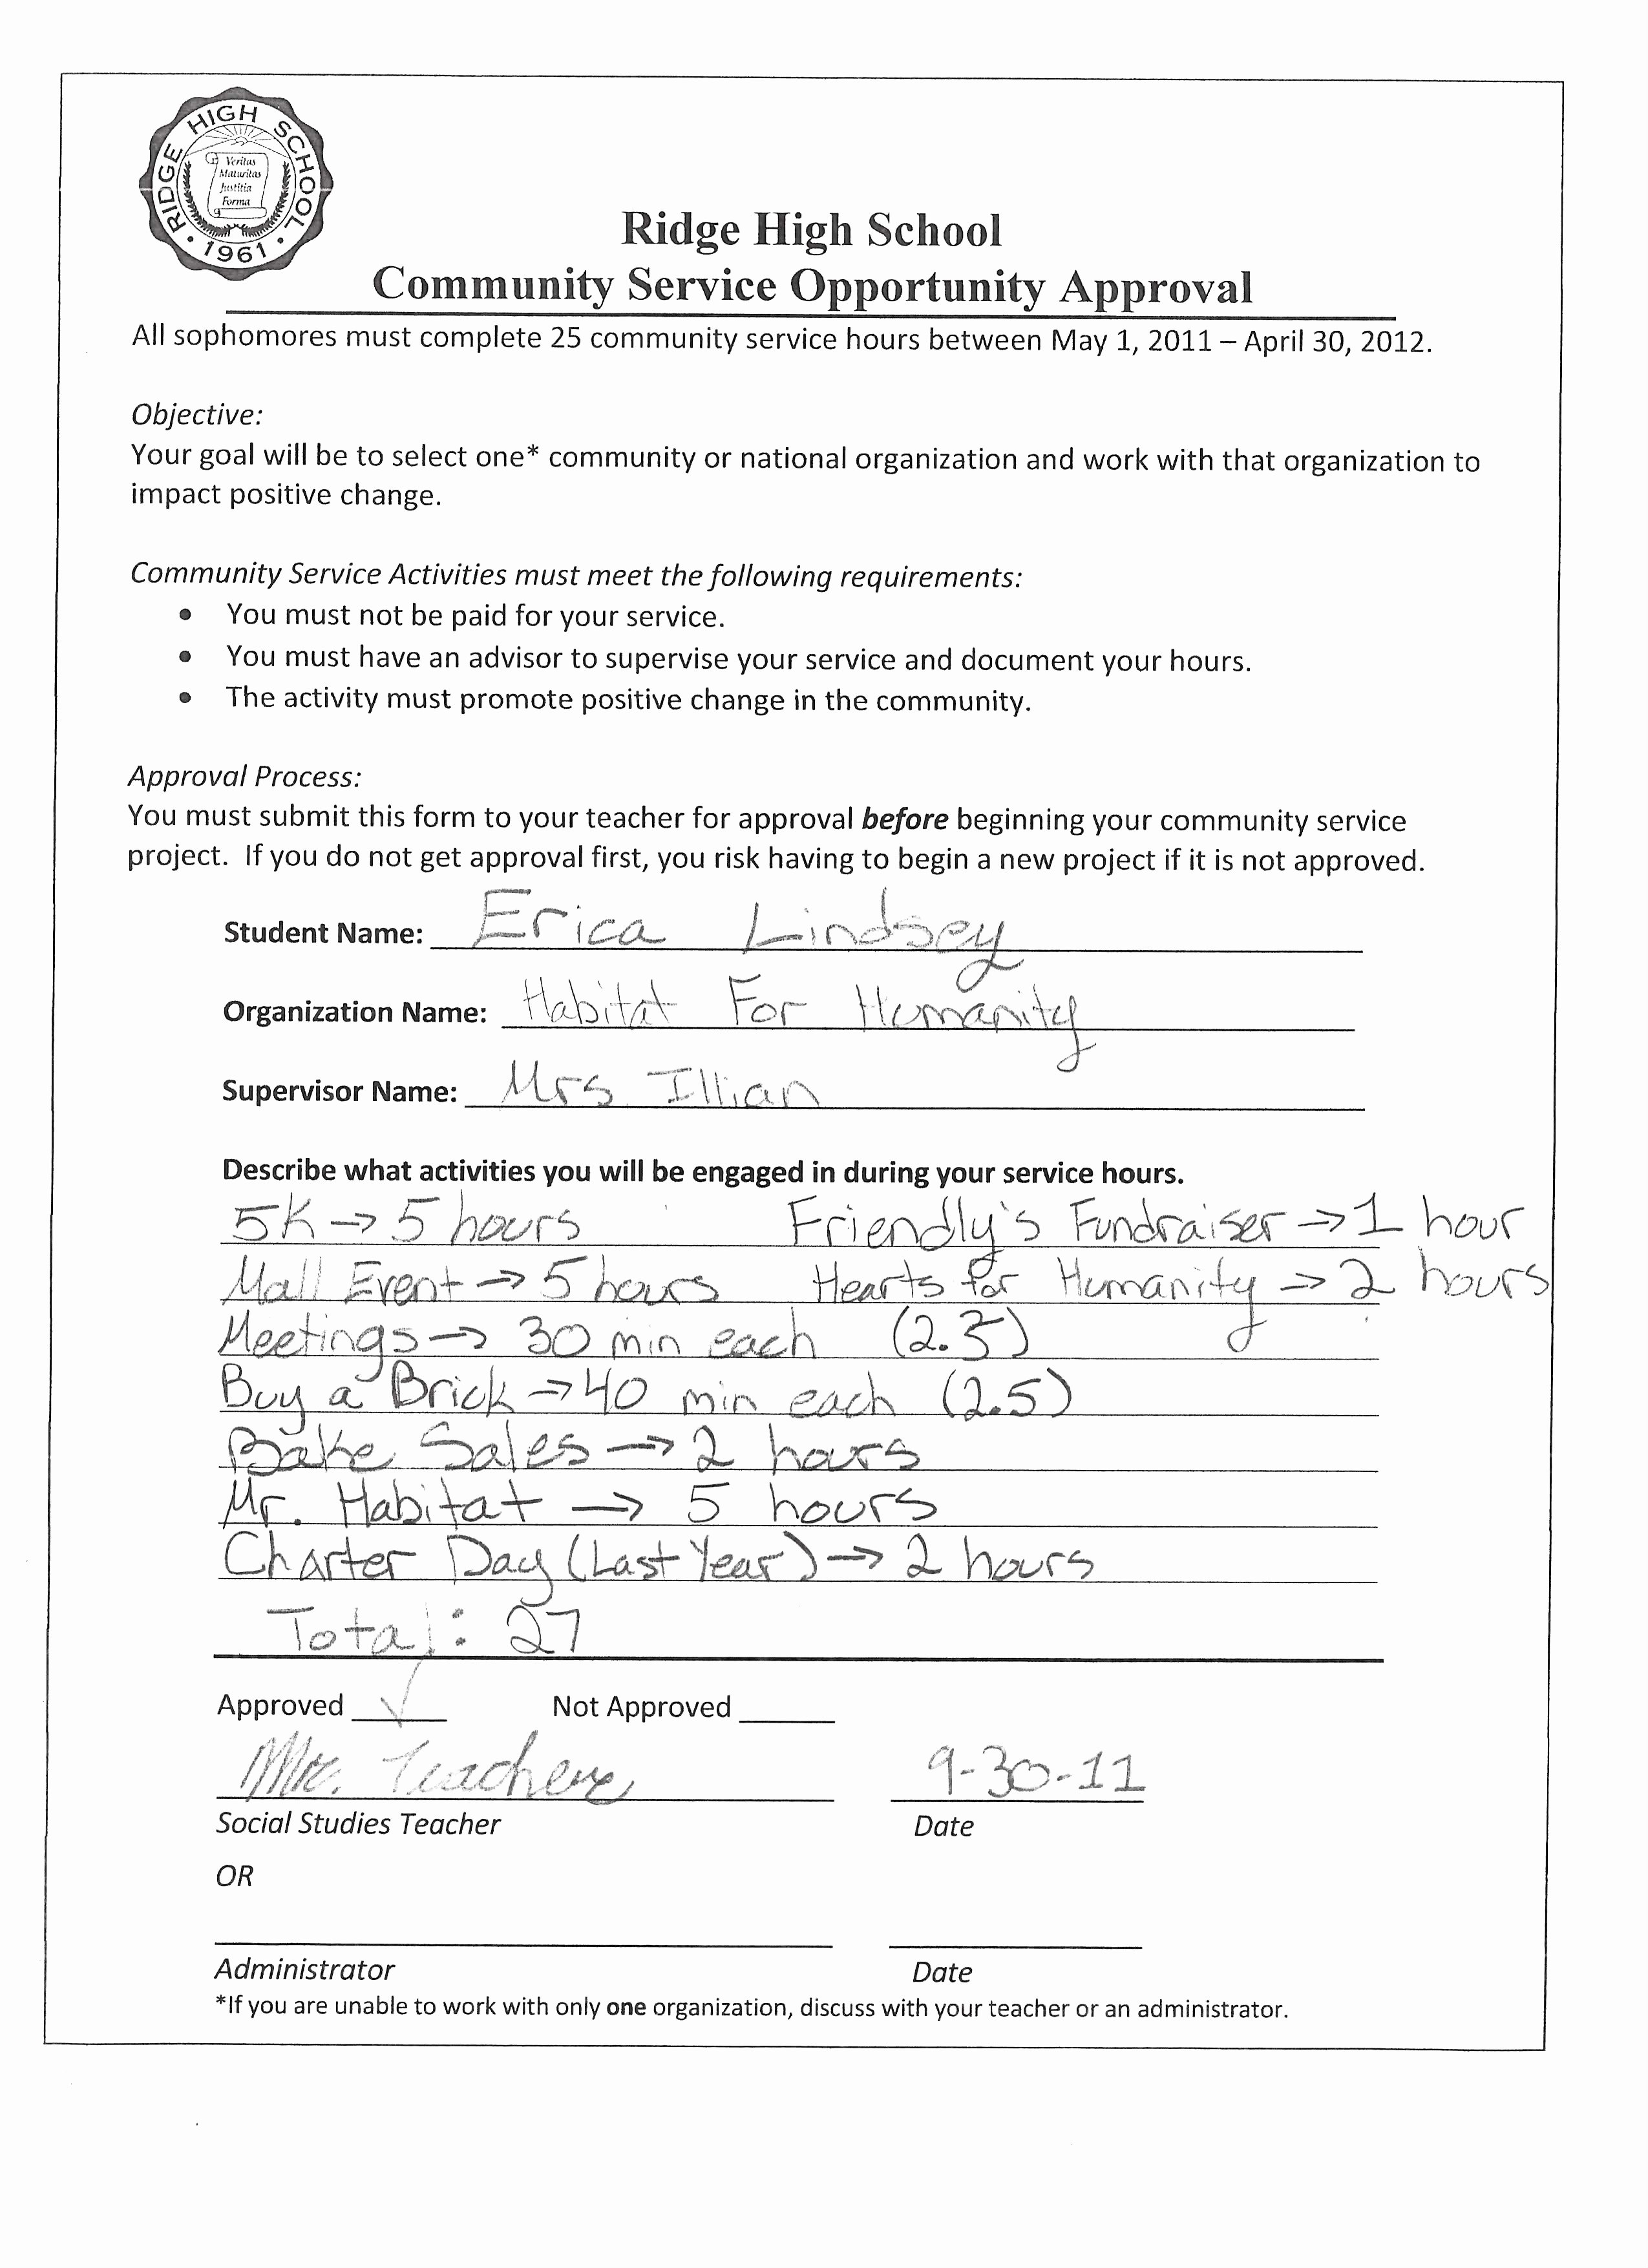 Community Service Hours form Template Luxury Munity Service form